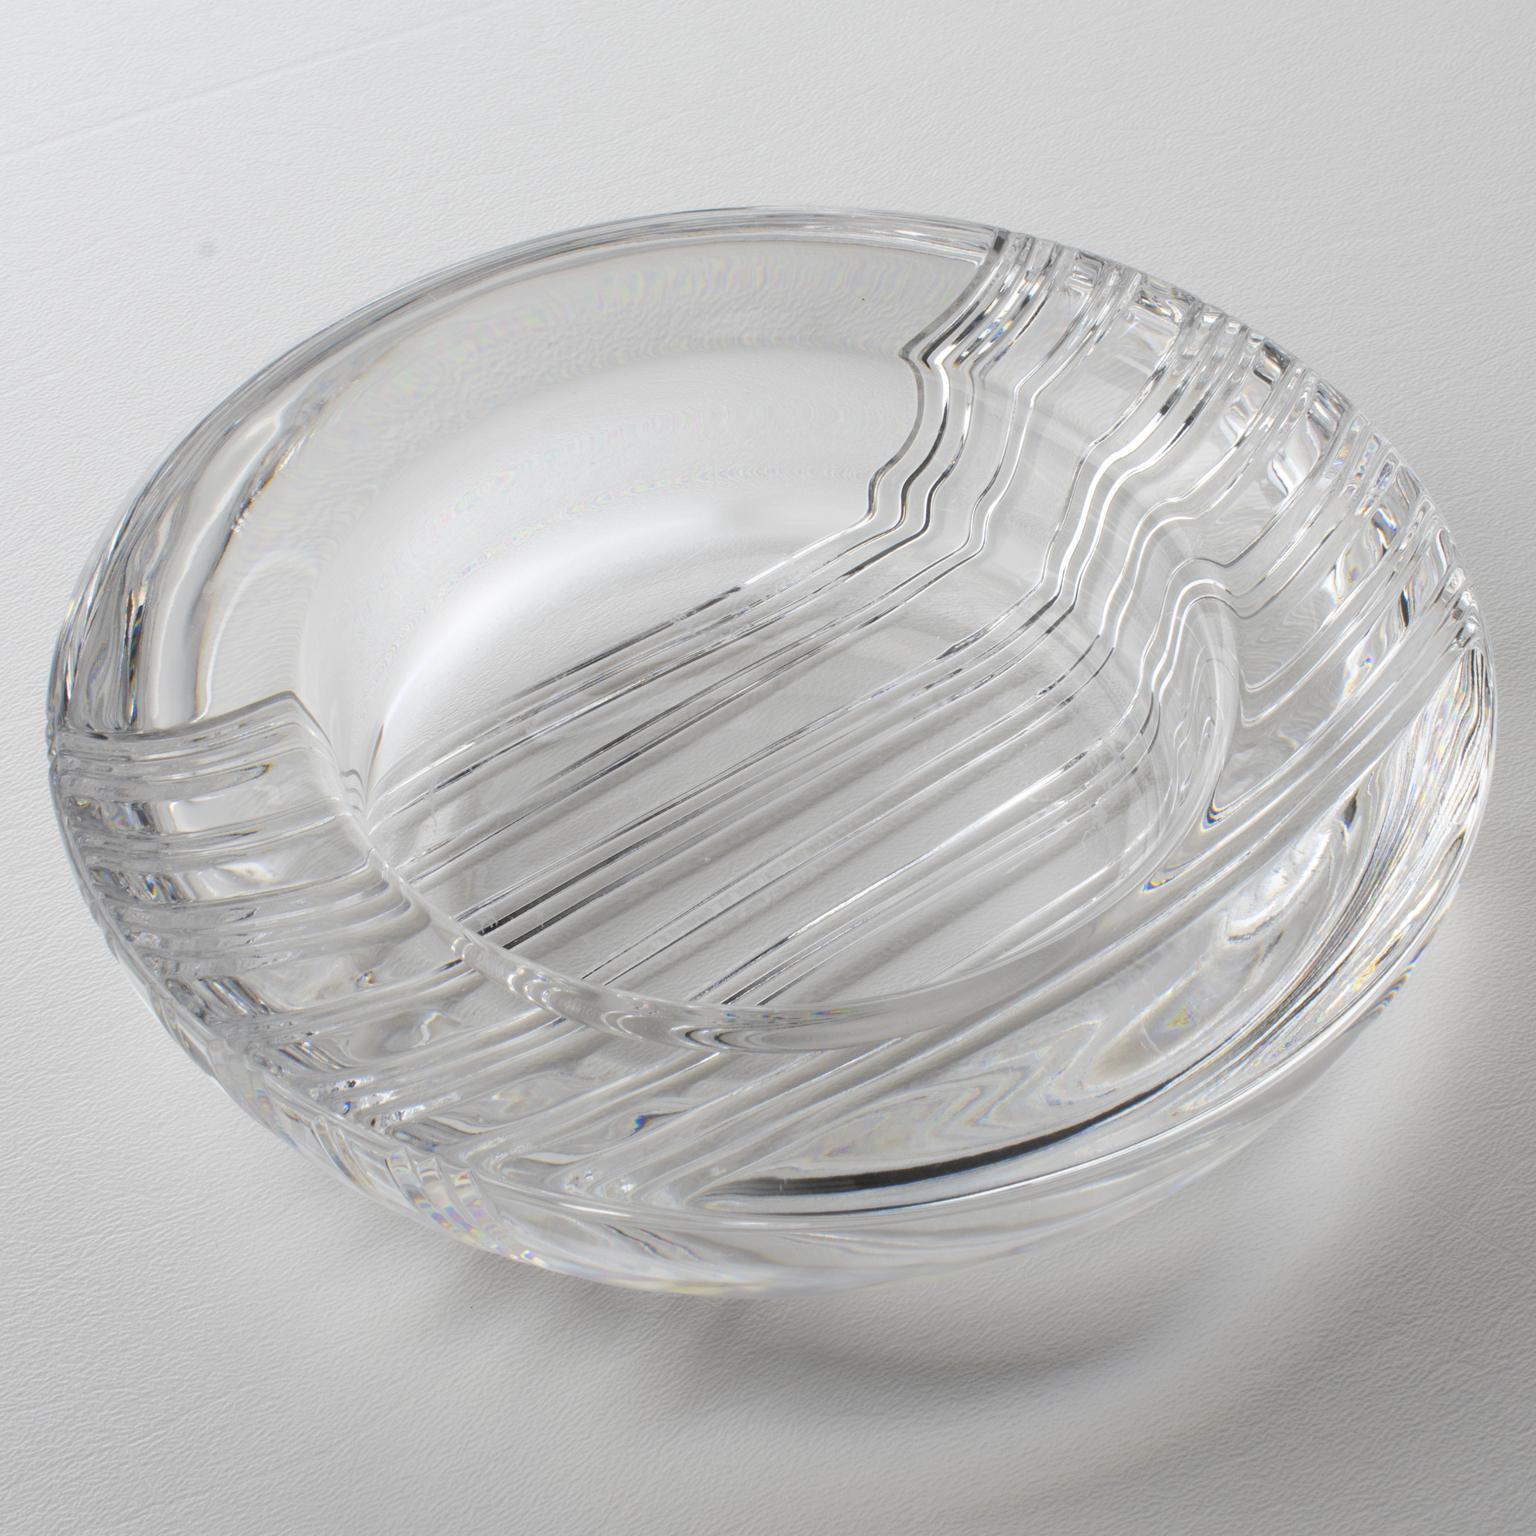 Christian Dior Crystal Cigar Ashtray Bowl Dish Catchall Vide Poche In Excellent Condition For Sale In Atlanta, GA